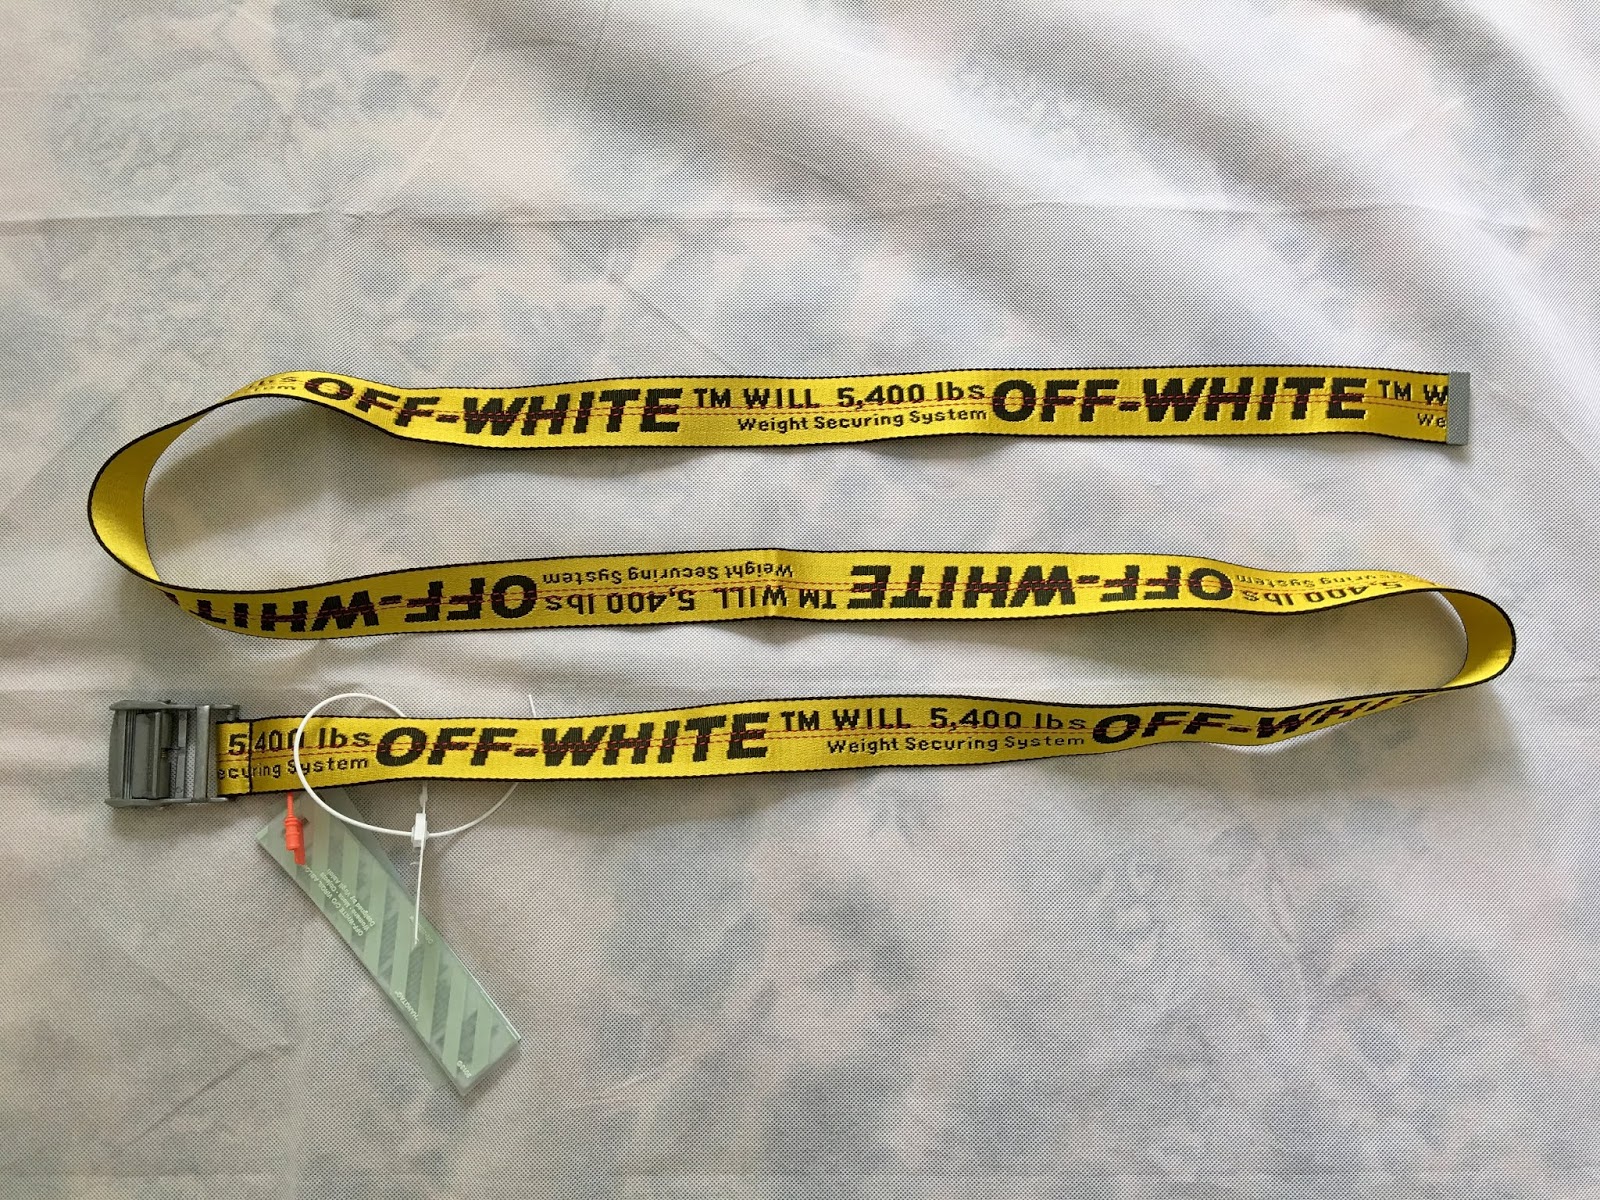 streetwear, skateboarding and clothing photo and video blog: Off-White Classic Industrial Yellow Belt Review